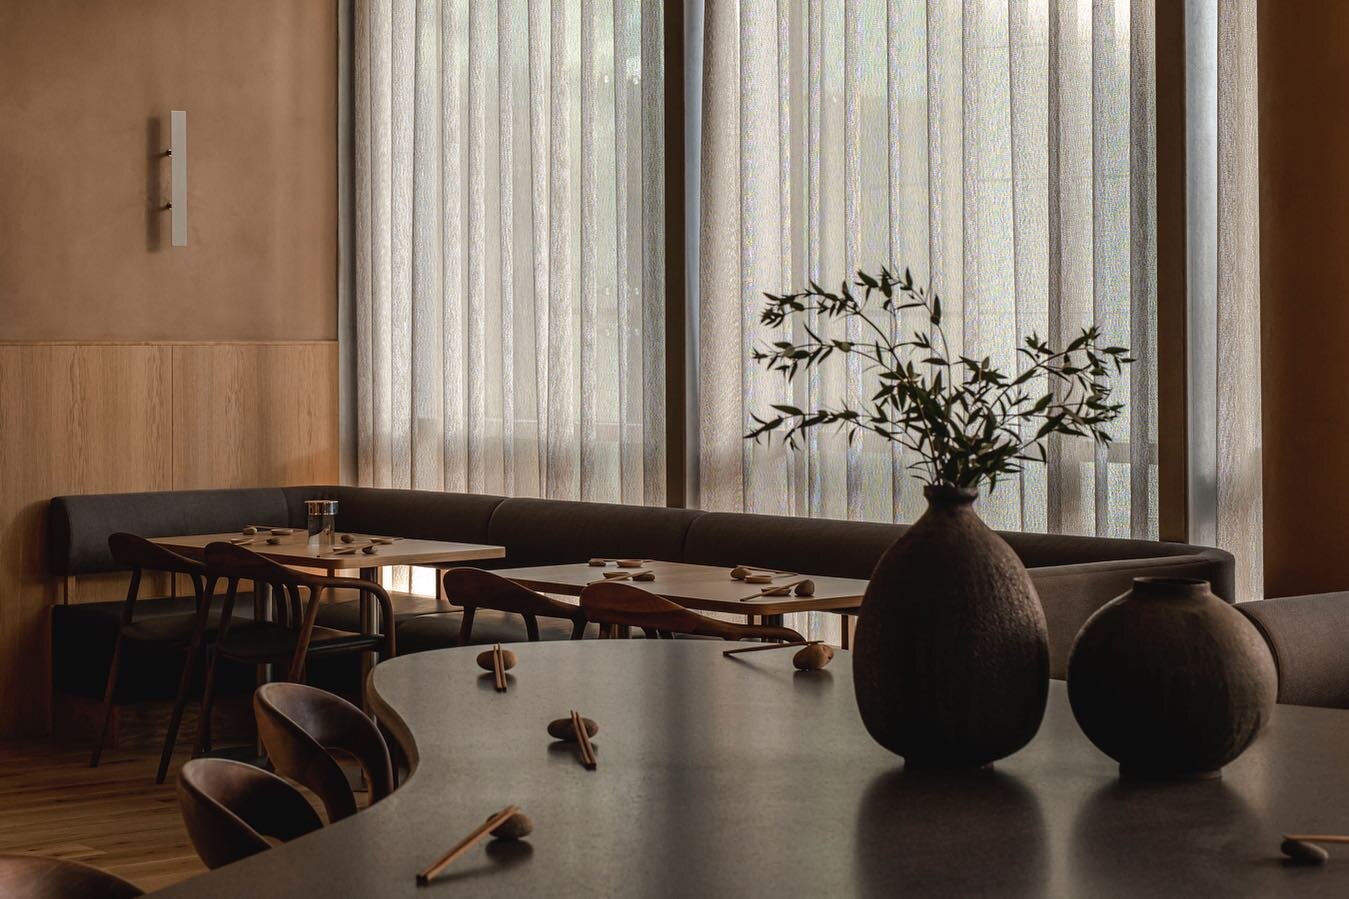 Loosely woven floor to ceiling curtains act to shield the guests from the buzz outside but allow the diffused morning light to trickle in. Seating is set deliberately low around the perimeter of the room for an intimate dining experience. 

#studioem